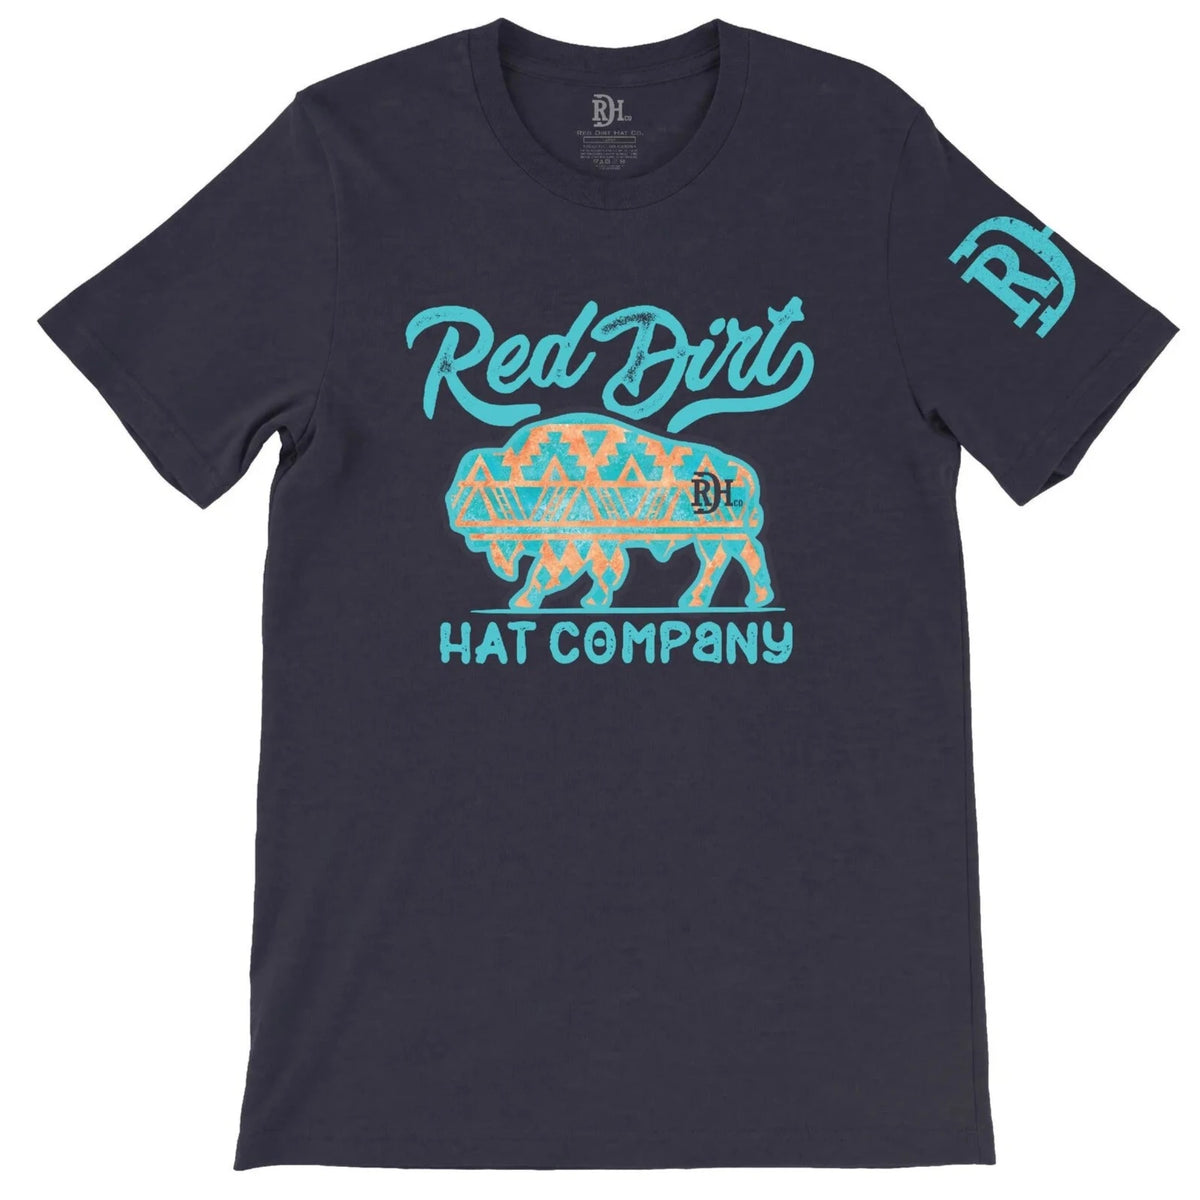 Red Dirt Hat Co. "Aztec Bison" T-Shirt in Navy Blue